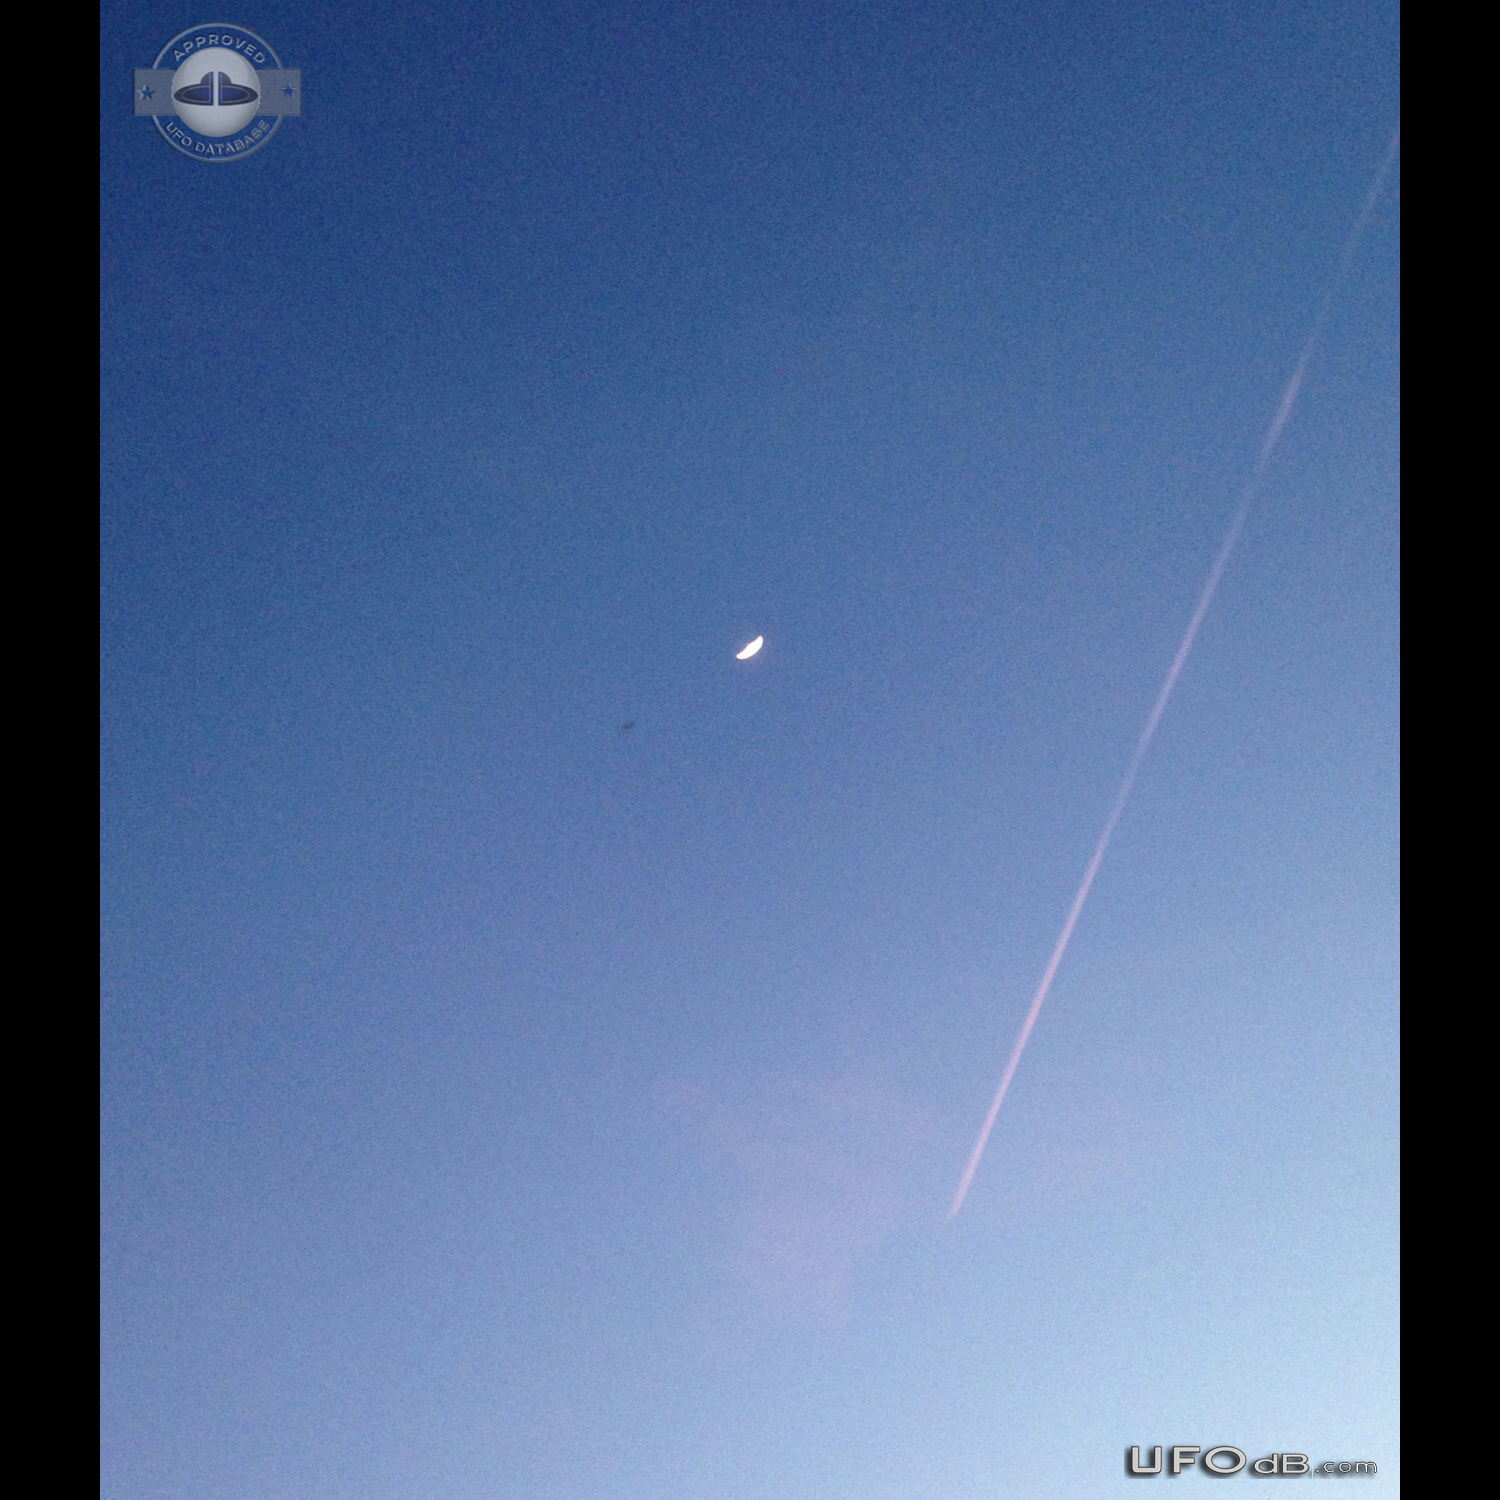 Triangle object moved at high speed, then stationary - Trinity Florida UFO Picture #677-1